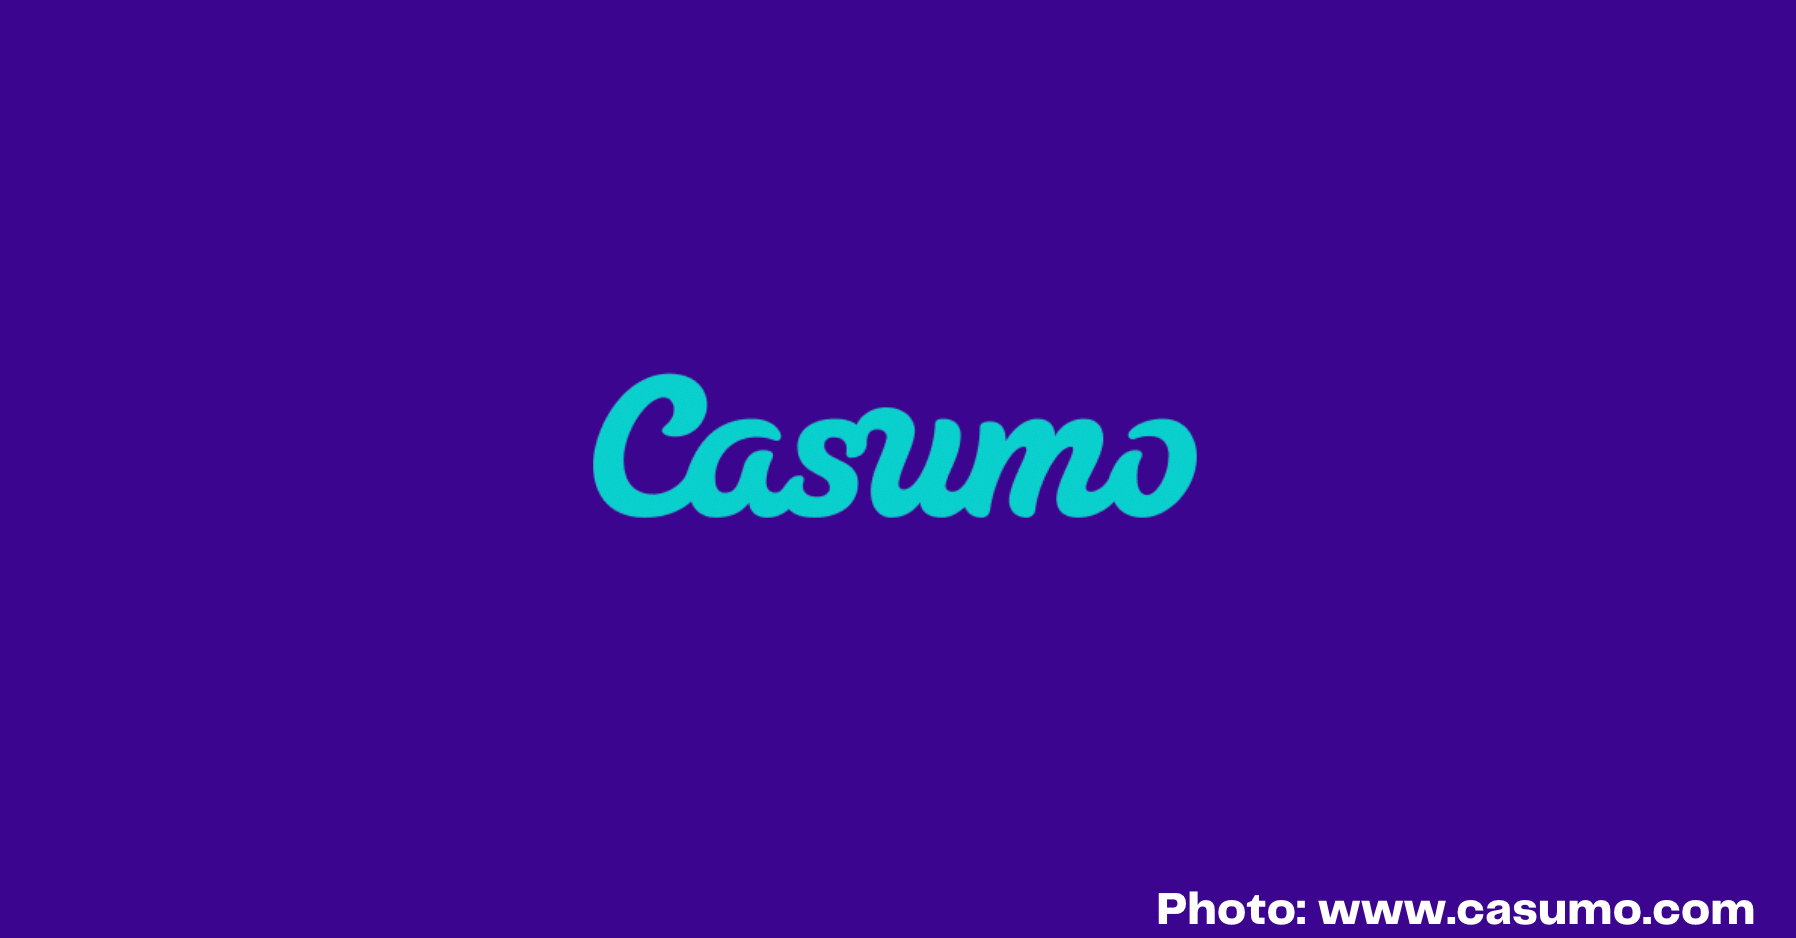 Casumo appoints new CEO